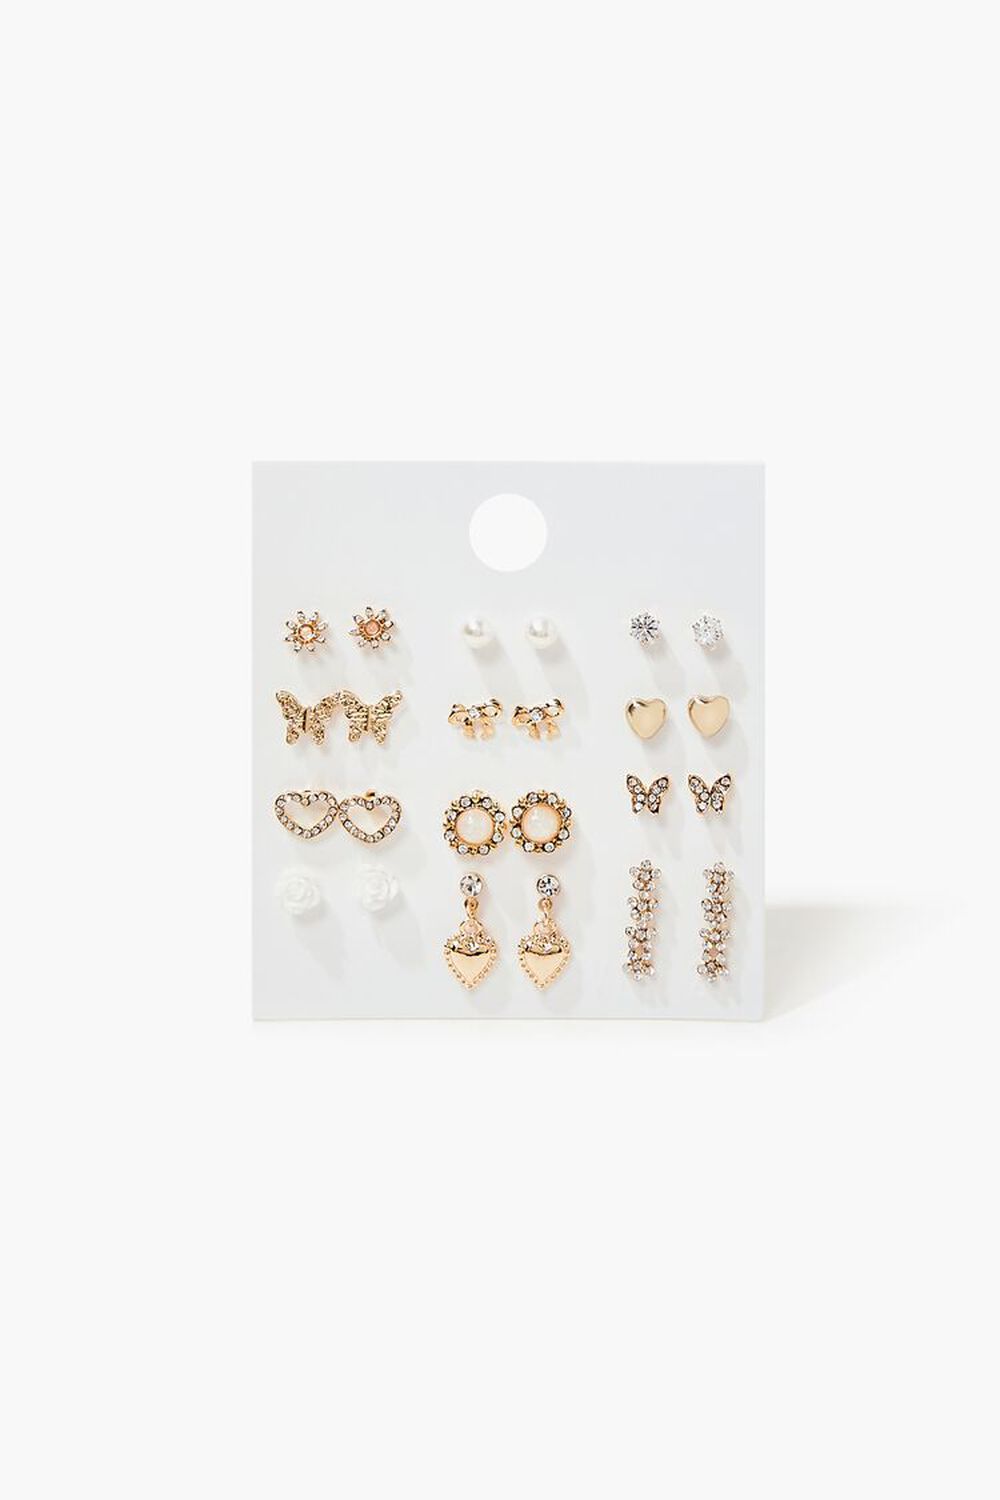 GOLD/CLEAR Assorted Stud & Drop Earring Set, image 1